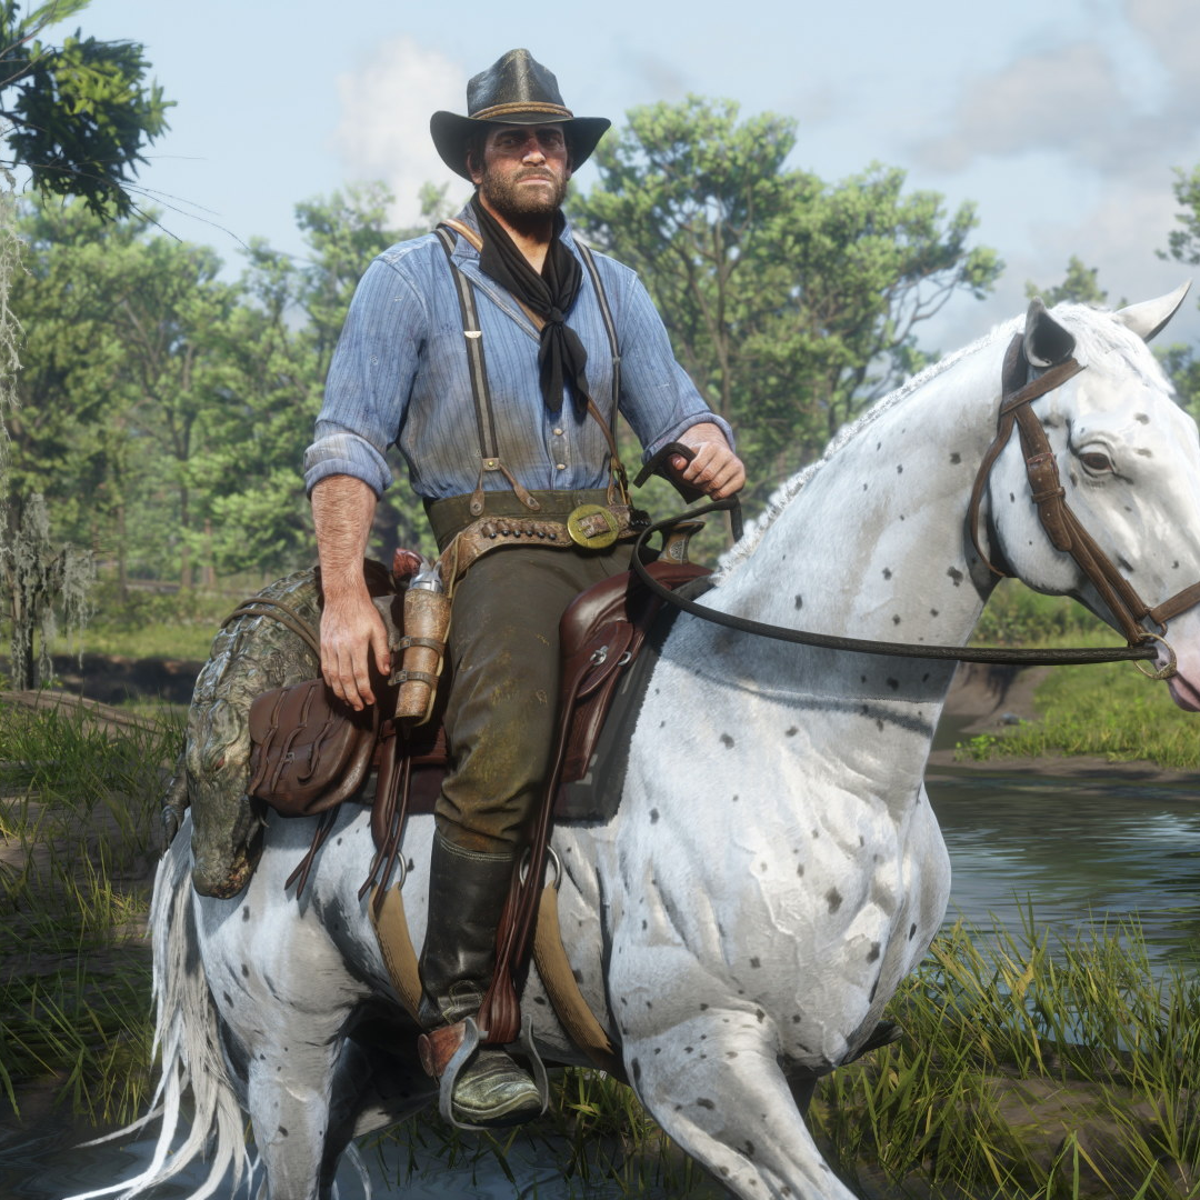 Red Dead Redemption 2 PC settings guide: How to get the best